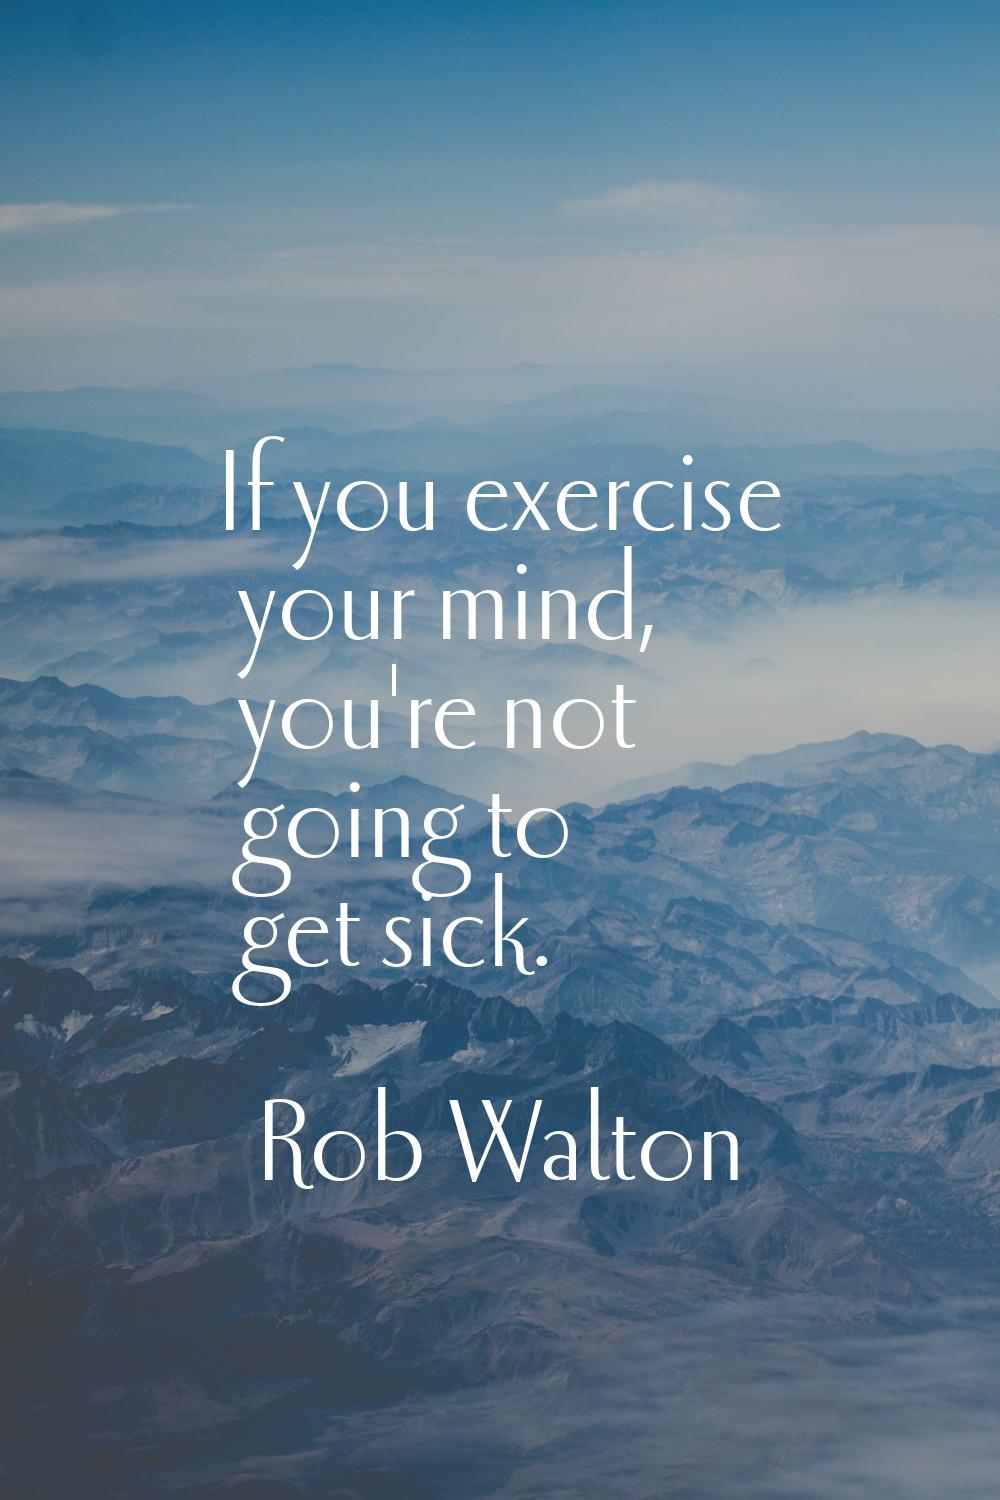 If you exercise your mind, you're not going to get sick.